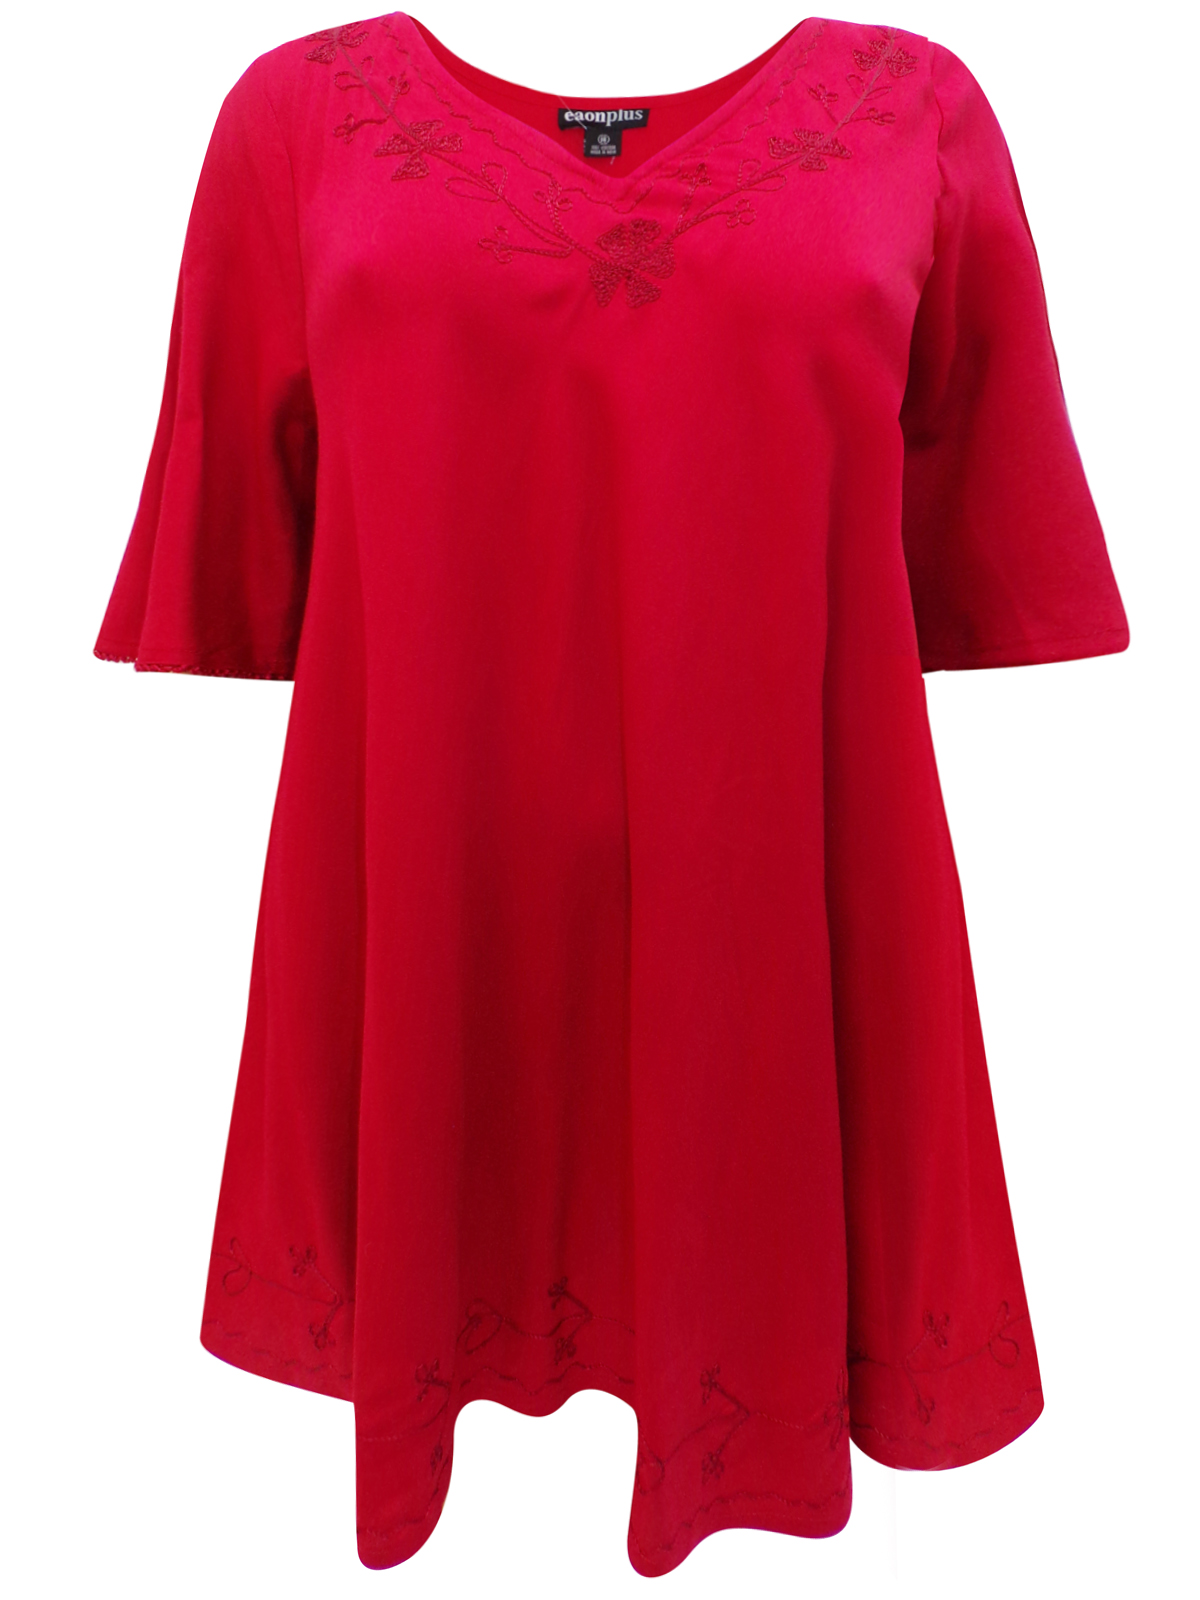 eaonplus RED Embroidered Trim Curved Hem Blouse - Plus Size 18 to 32